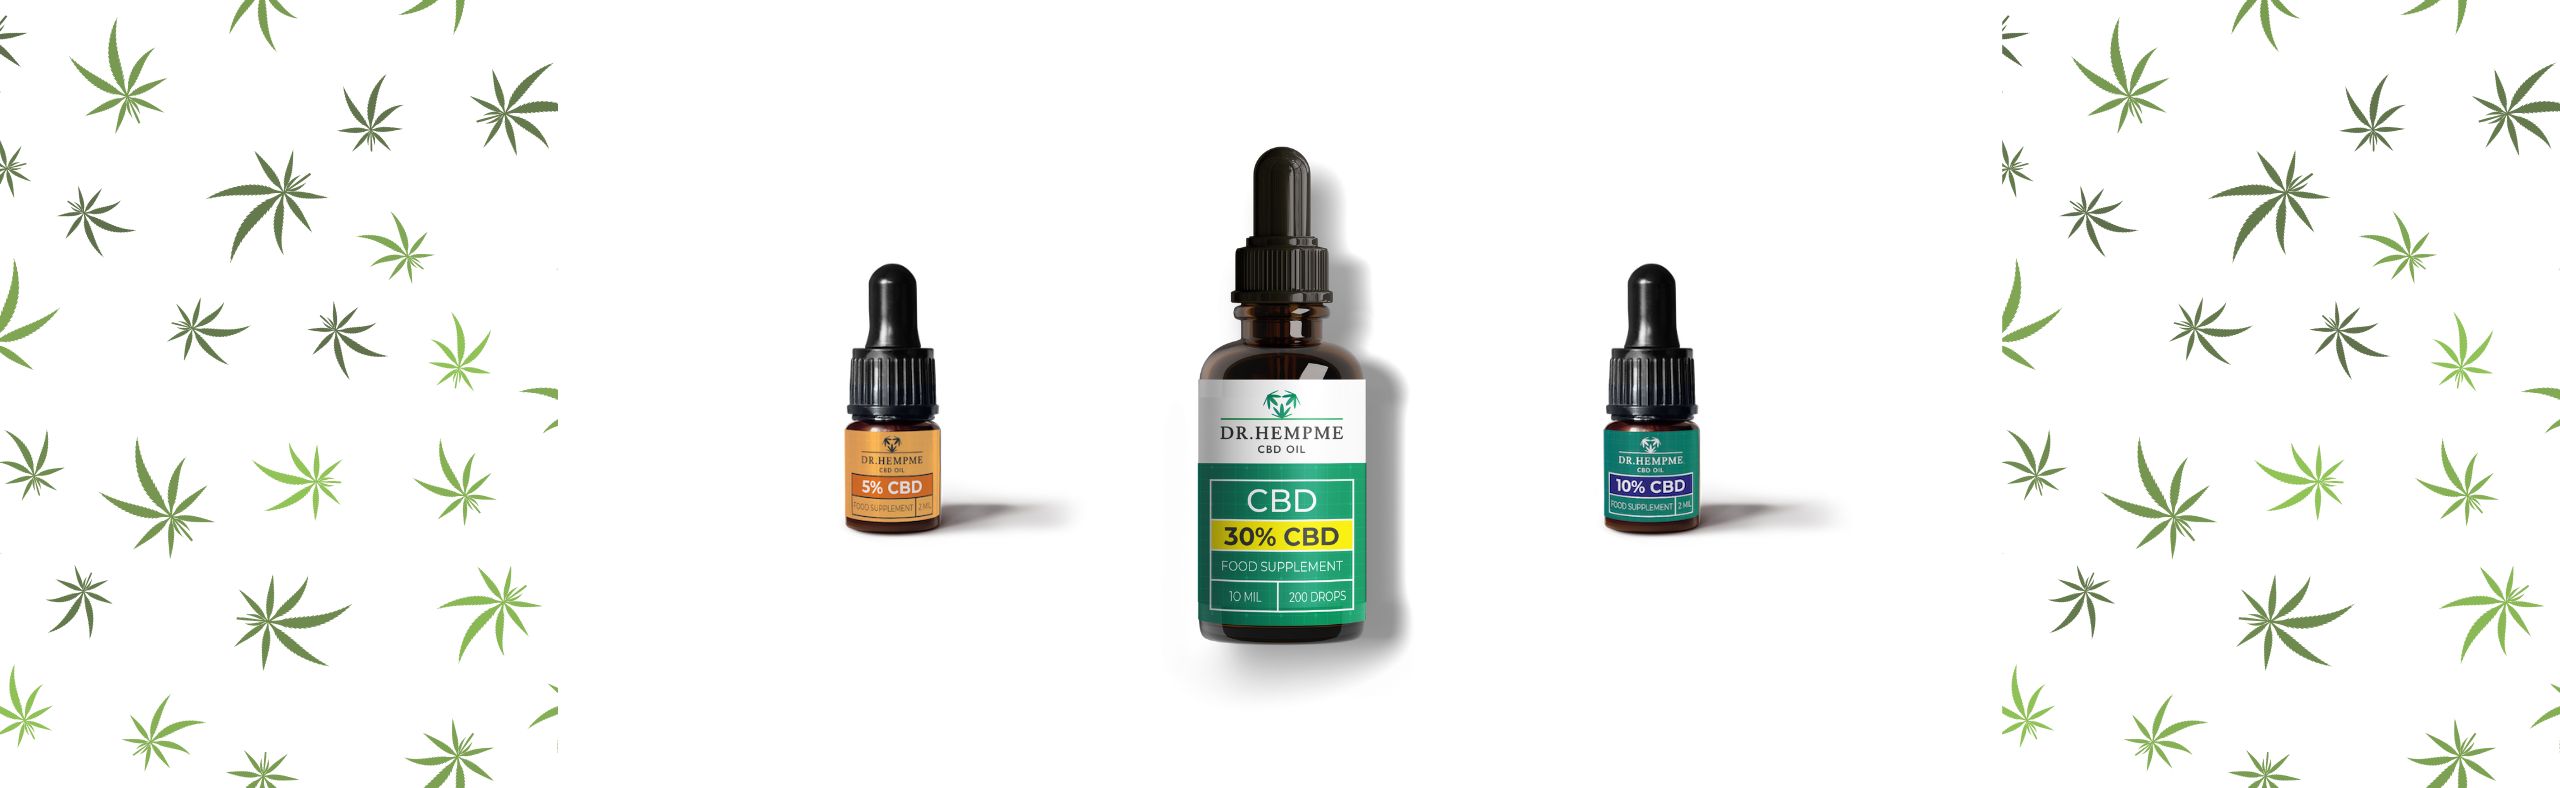 How & Where to Buy CBD Oil in the UK & Northern Ireland